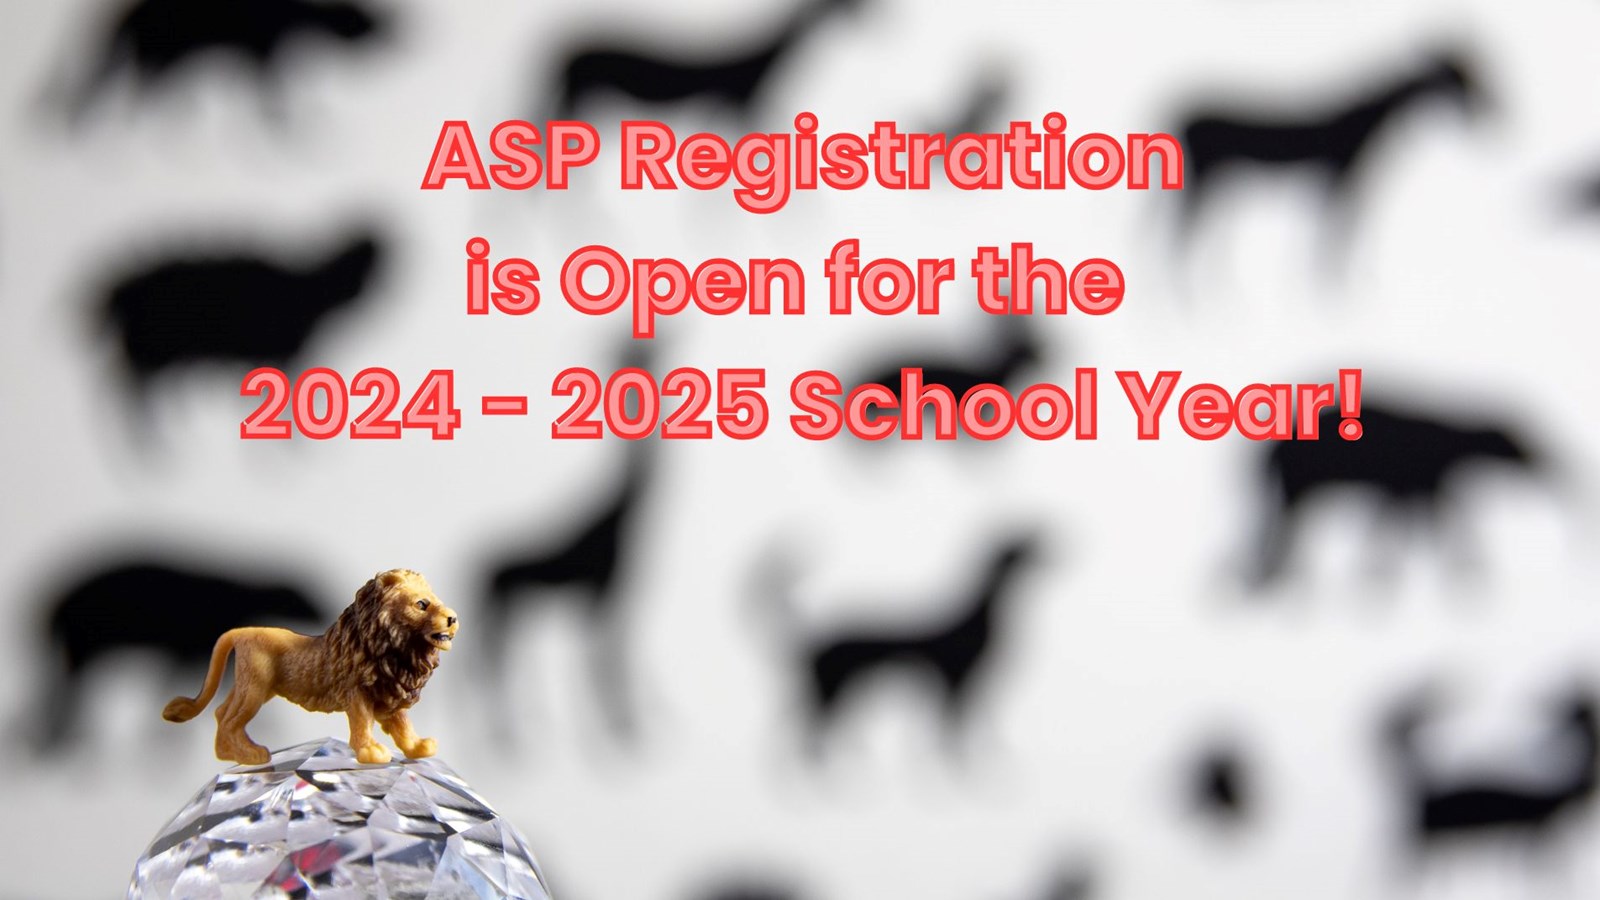 asp registration is open for the 24-25 school year